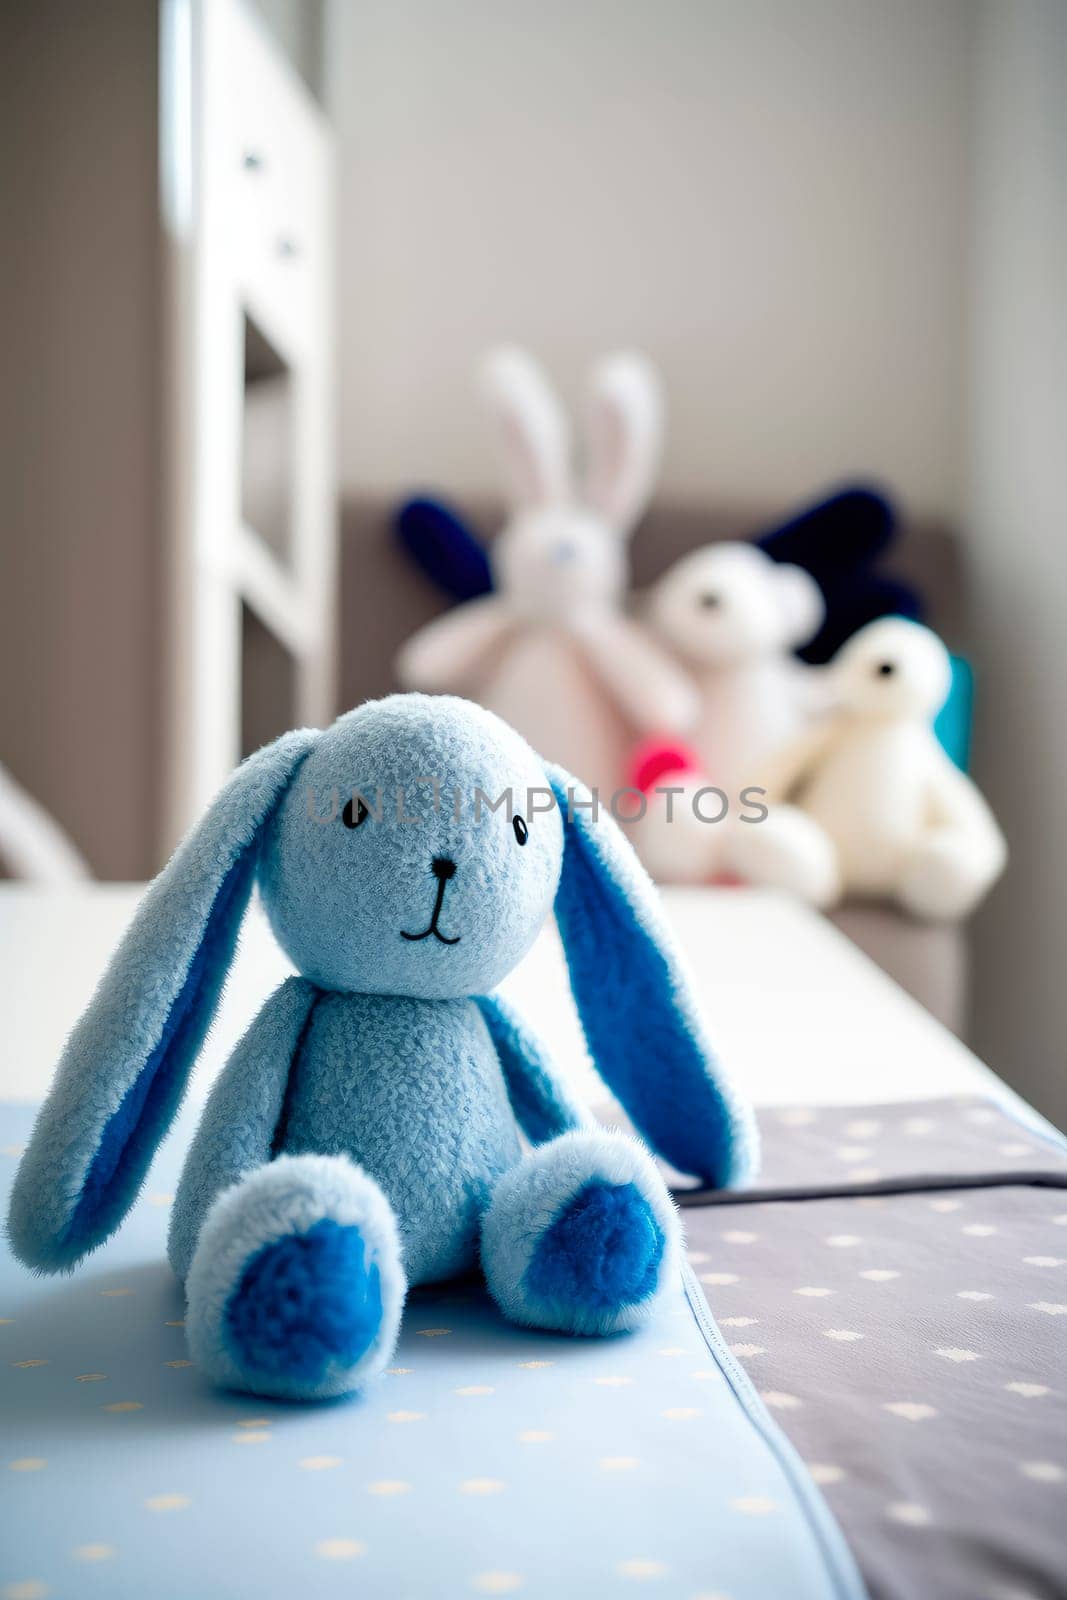 table with a plush toy hare in the baby room. by yanadjana